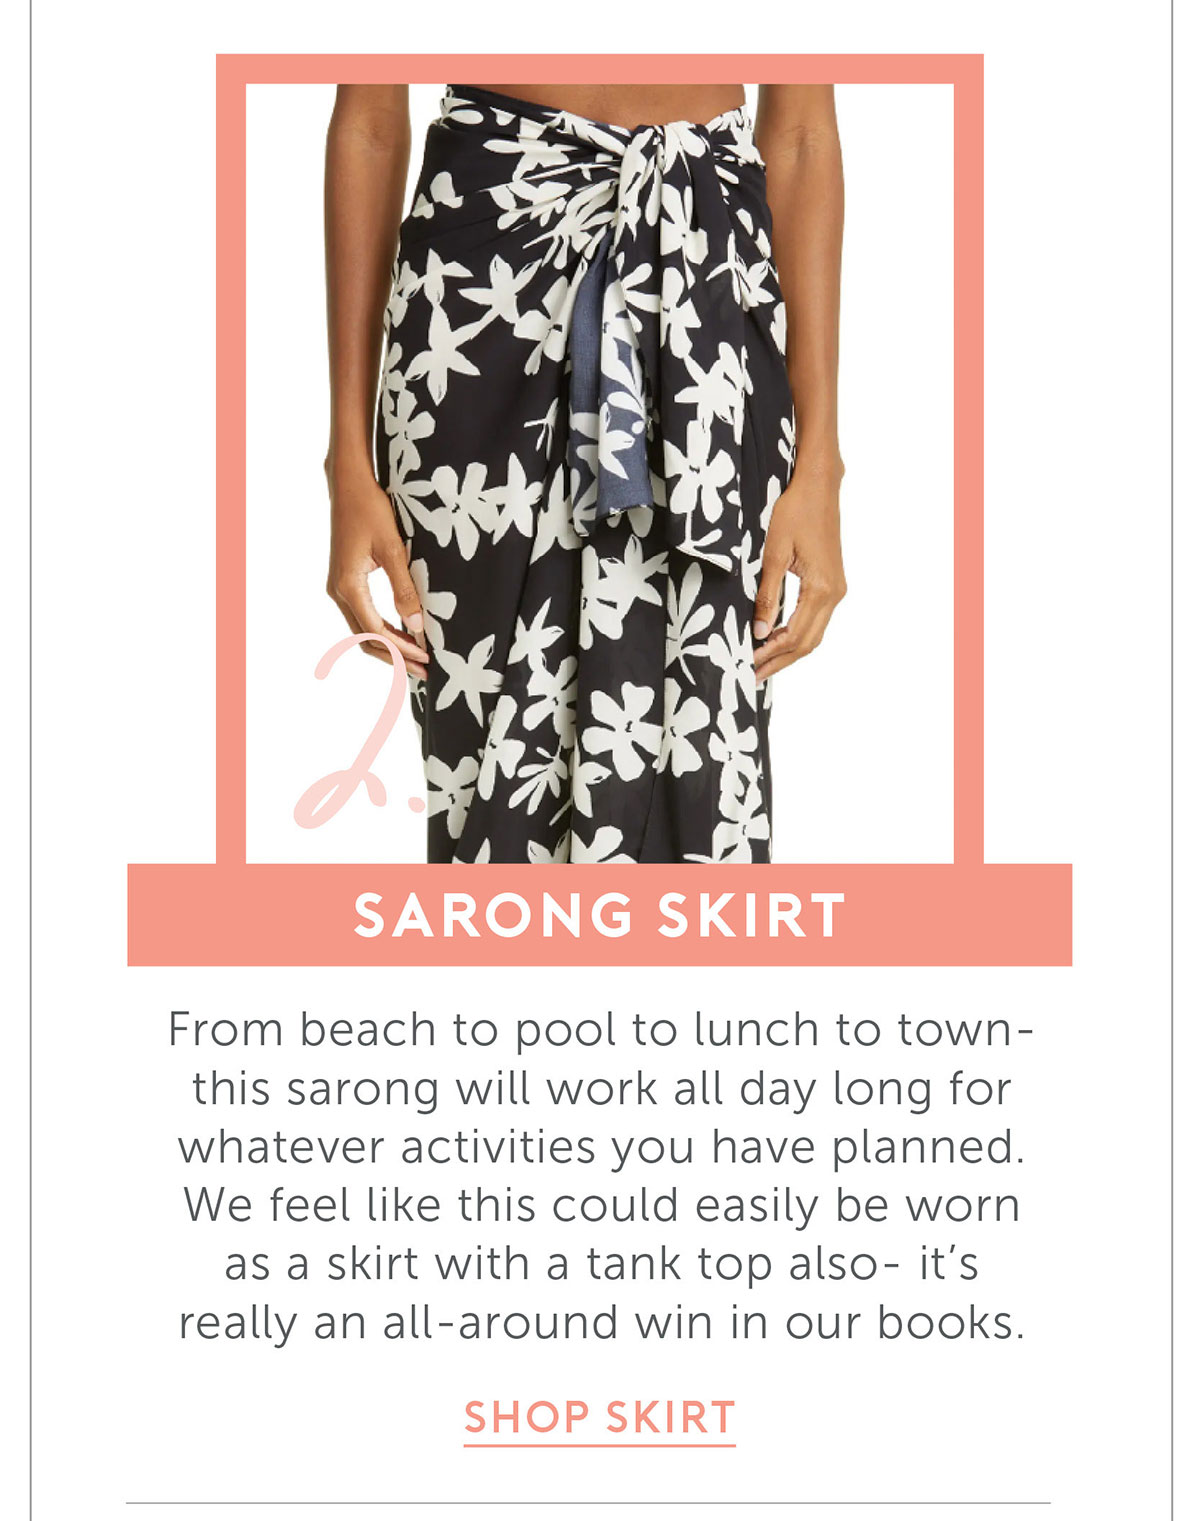 Sarong Skirt From beach to pool to lunch to town- this sarong will work all day long for whatever activities you have planned. We feel like this could easily be worn as a skirt with a tank top also- it's really an all-around win in our books.